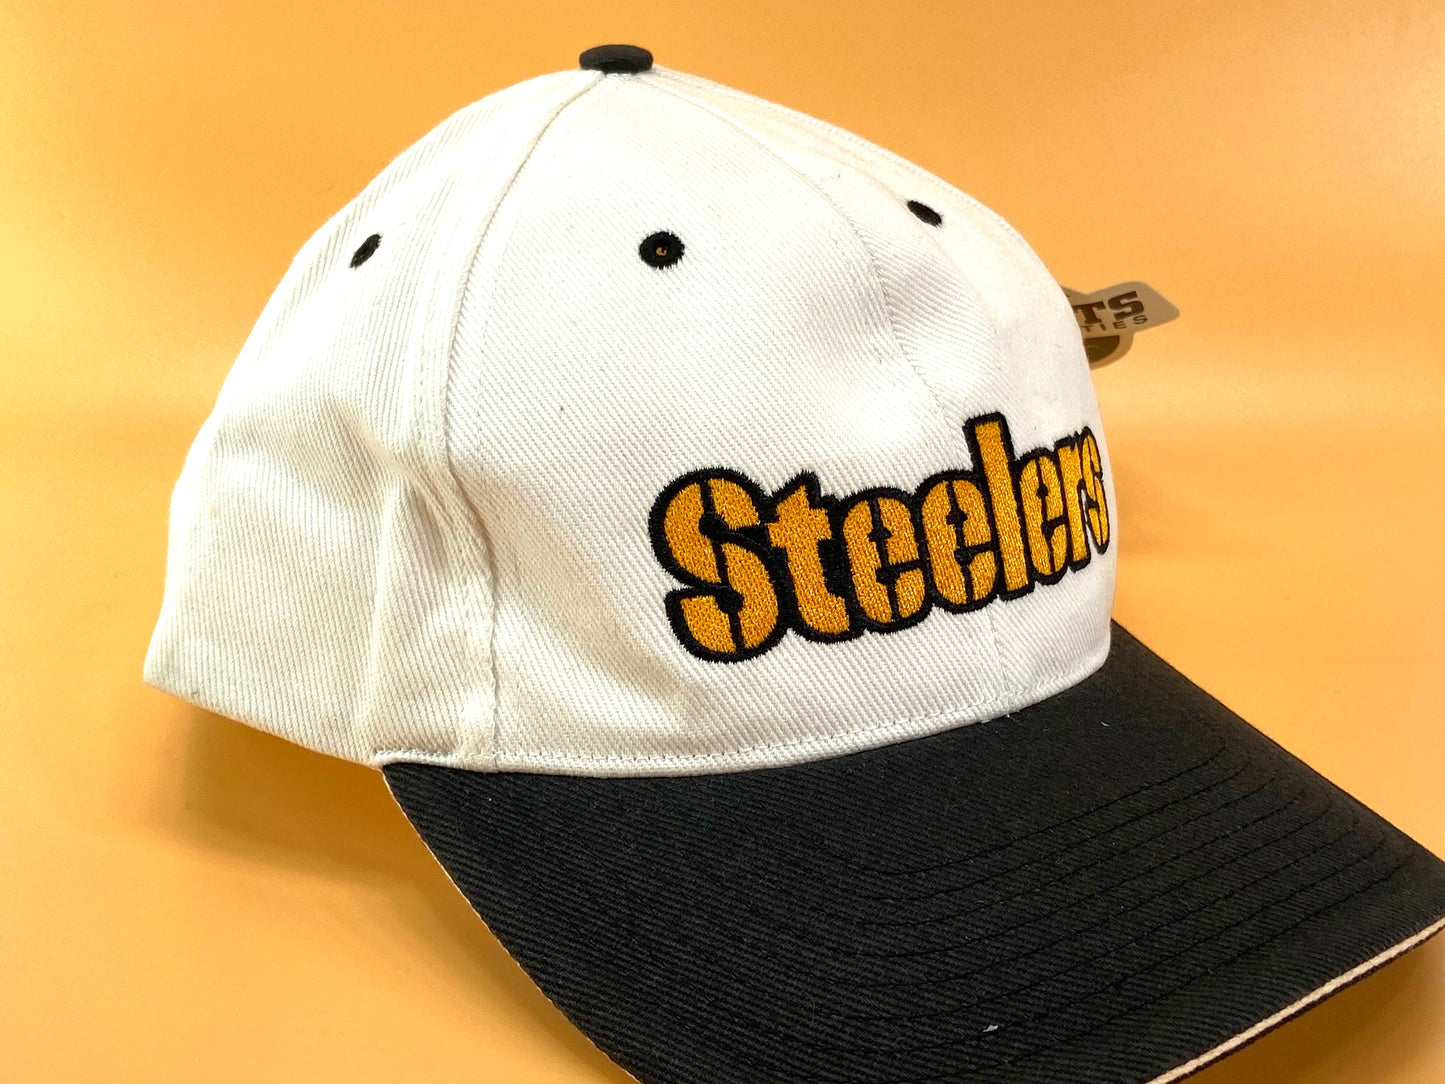 Pittsburgh Steelers Vintage NFL White "Shadow" Snapback (New) By Sports Specialties (Nike)